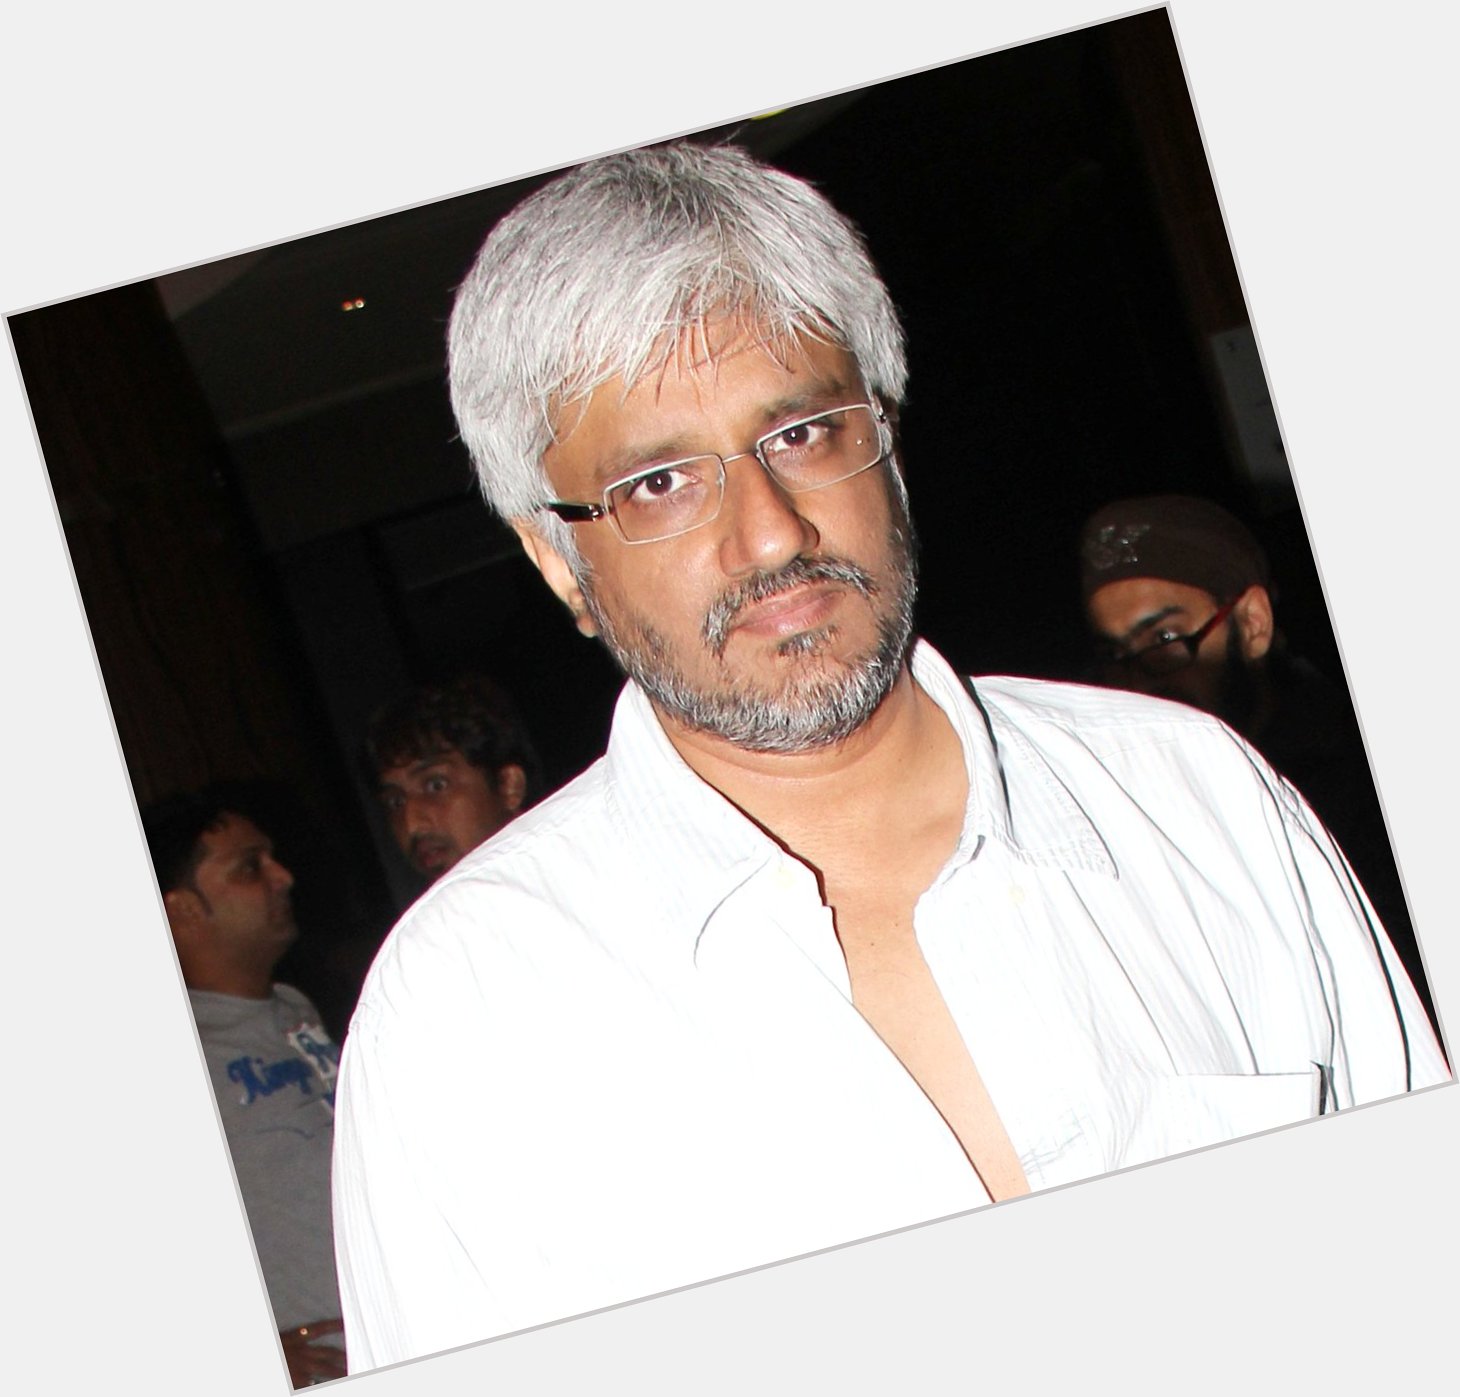 Happy Birthday To Vikram Bhatt Ji
He is a famous Indian Film Screenwriter, Director and Producer. 